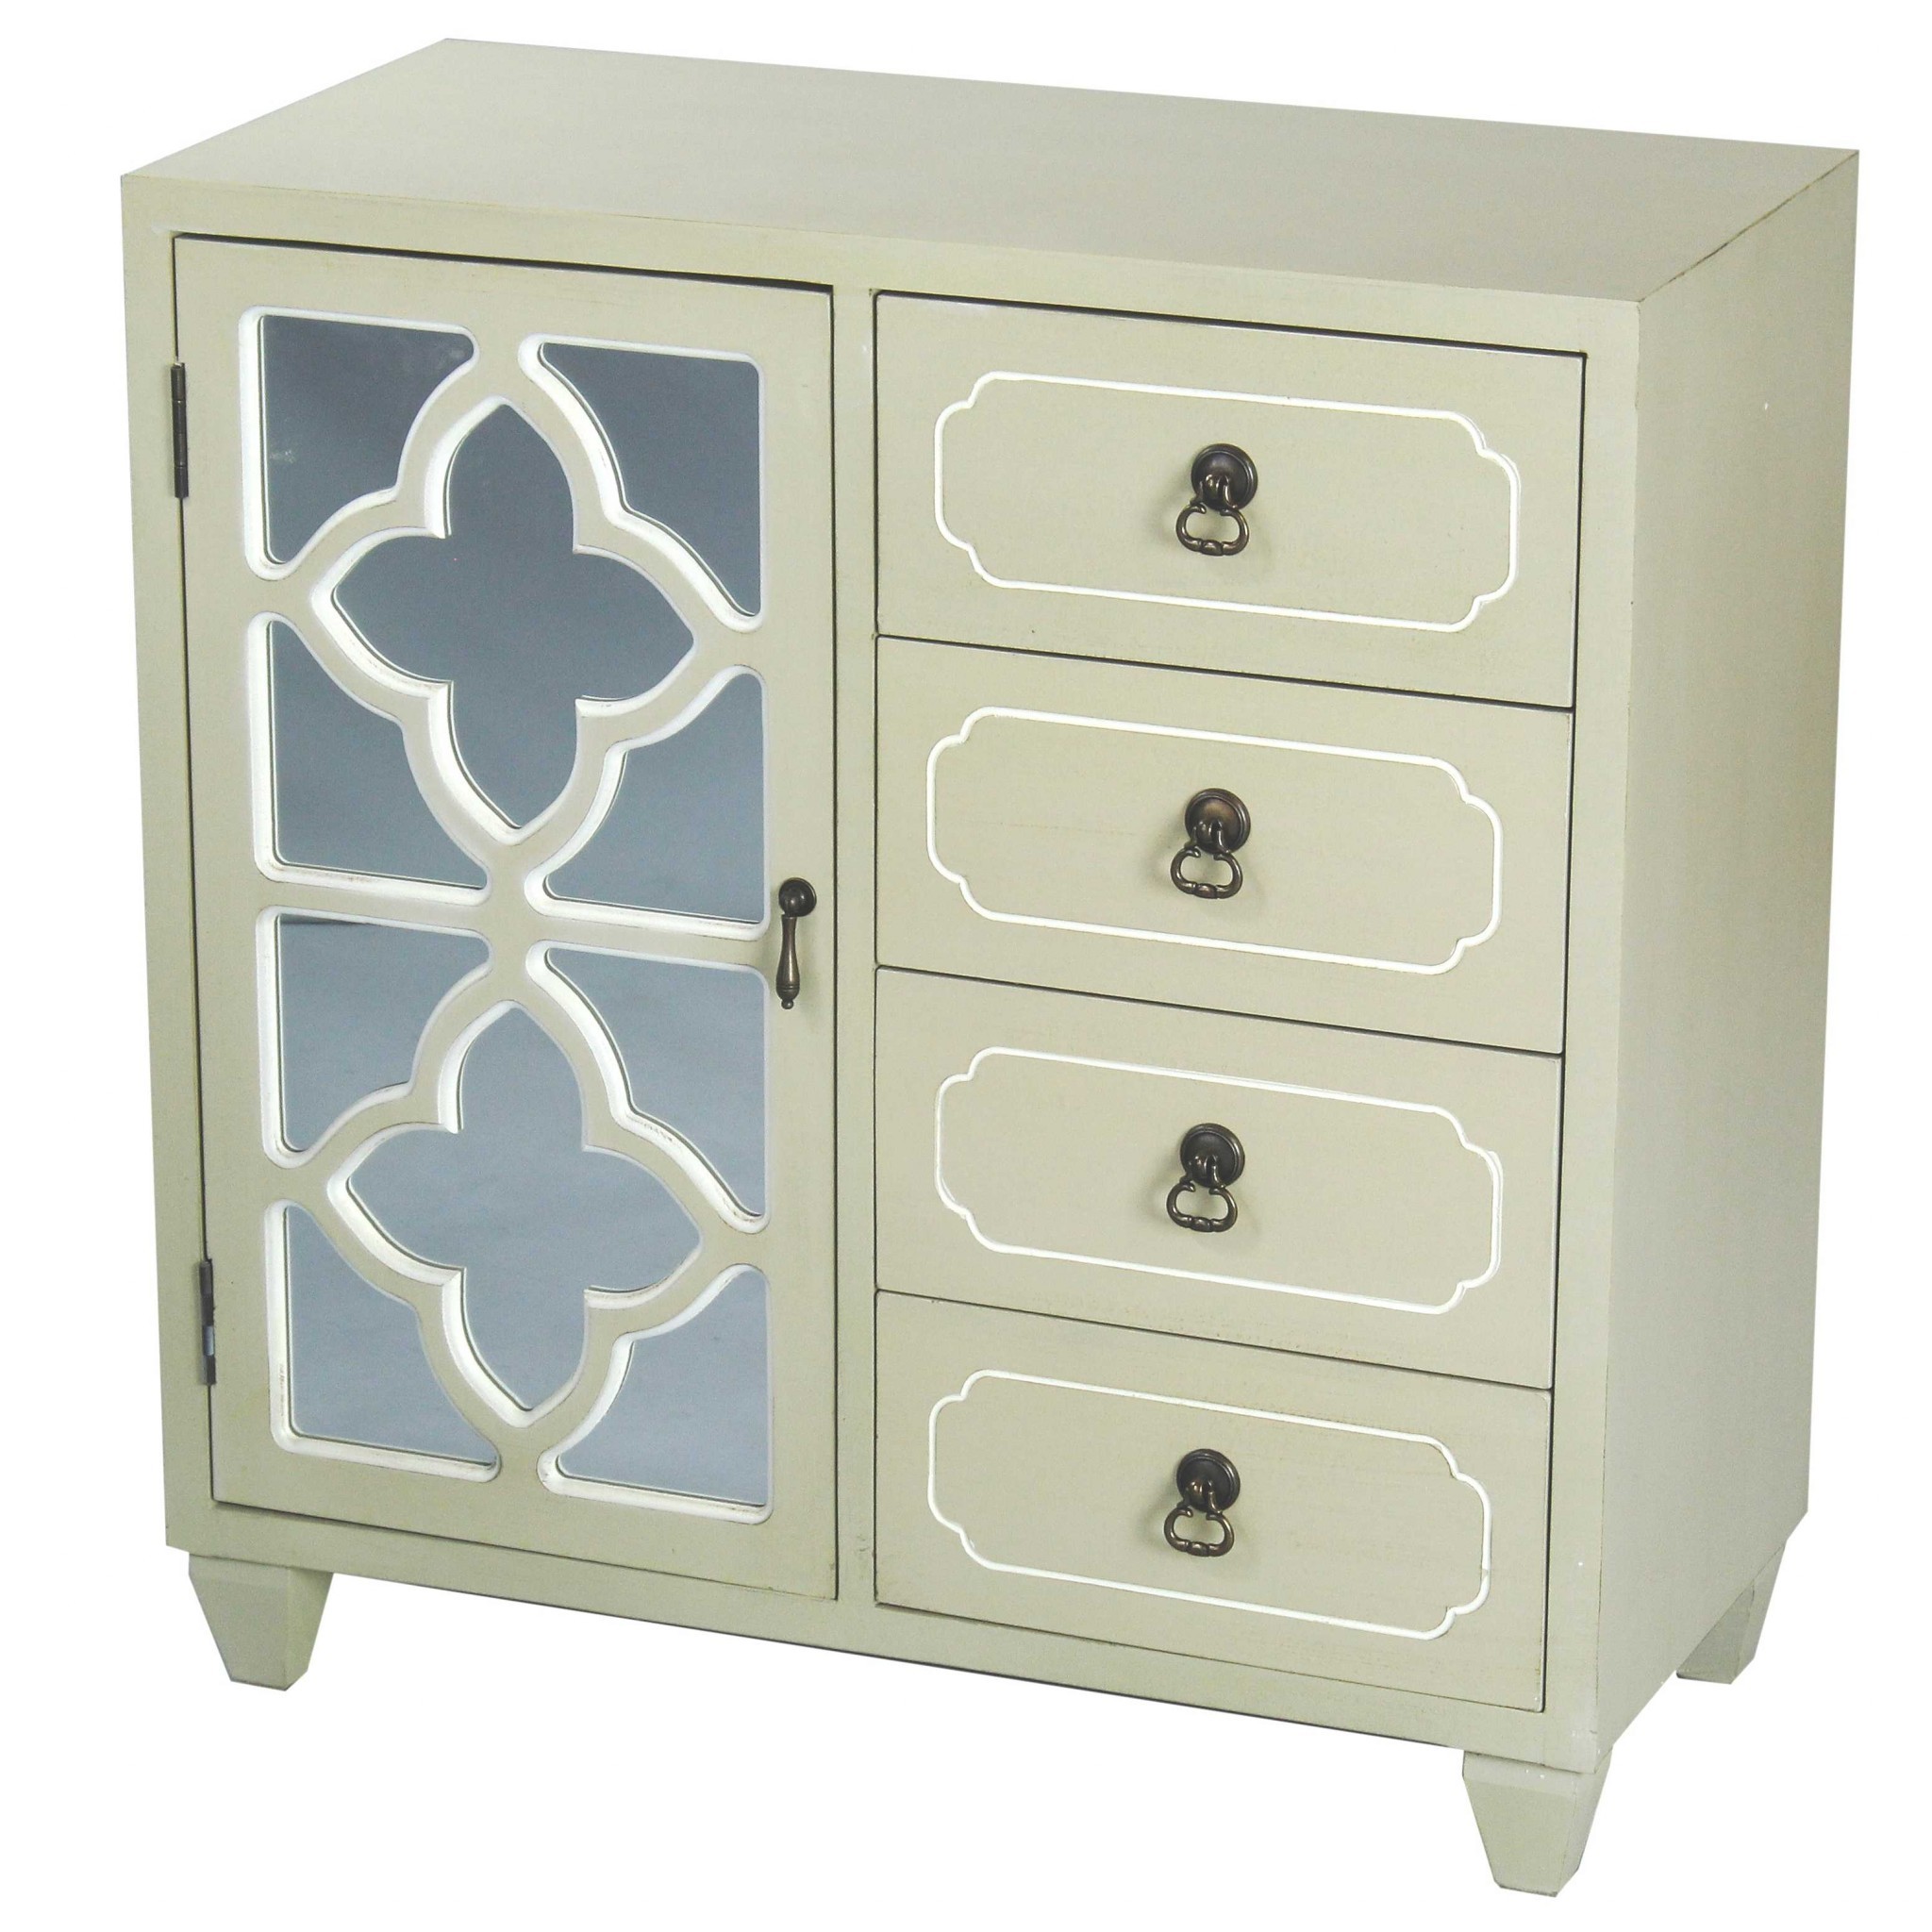 29.5" X 14" X 30.75" Beige MDF Wood Mirrored Glass Sideboard with a Door Drawers and Quatrefoil Inserts